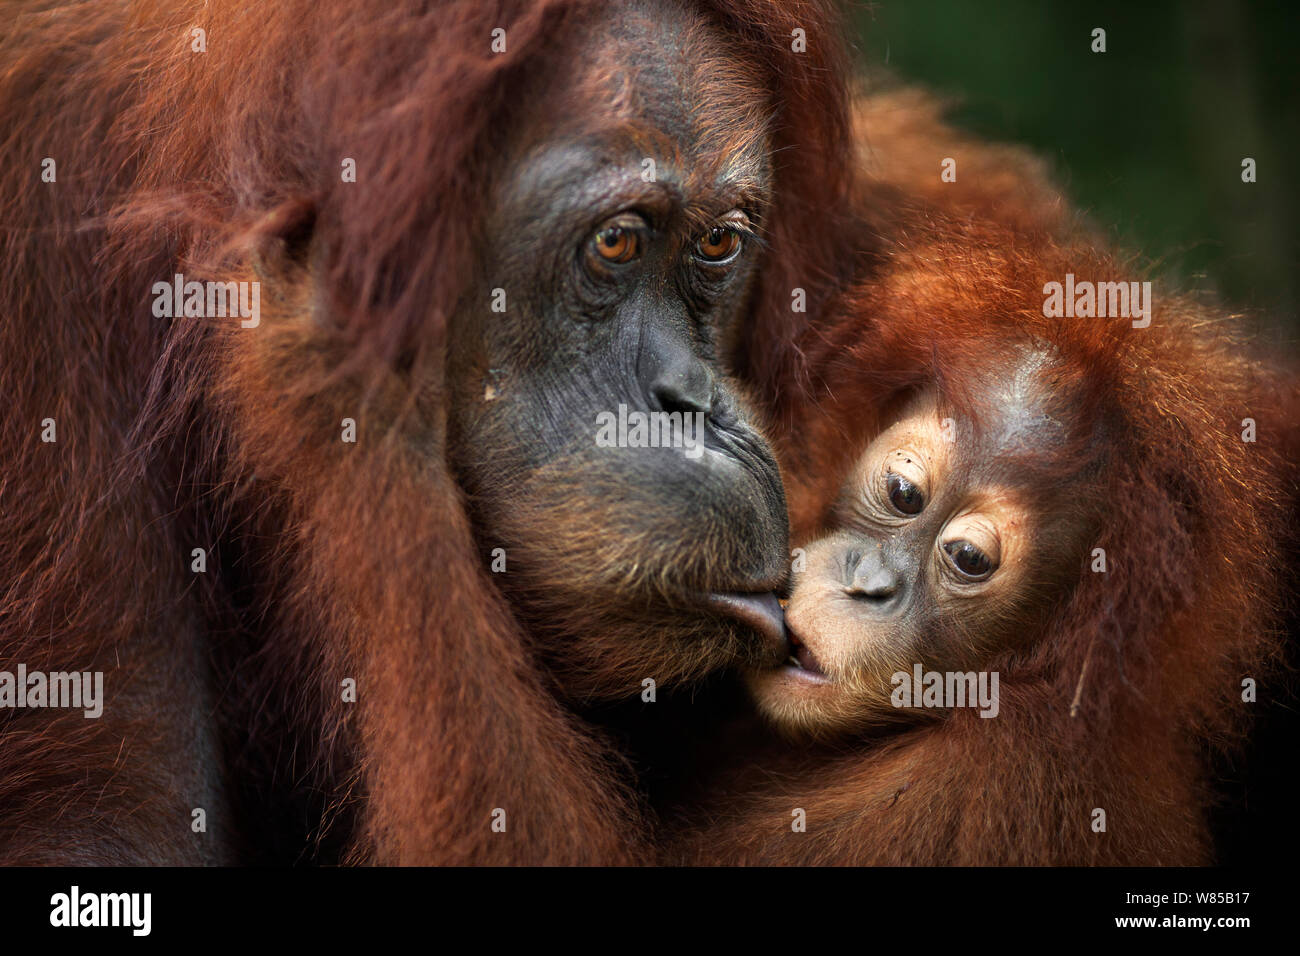 Sumatran orangutan (Pongo abelii) female baby 'Sandri' aged 1-2 years taking food from her mother 'Sandra' aged 22 years. Gunung Leuser National Park, Sumatra, Indonesia. Rehabilitated and released (or descended from those which were released) between 1973 and 1995. Stock Photo